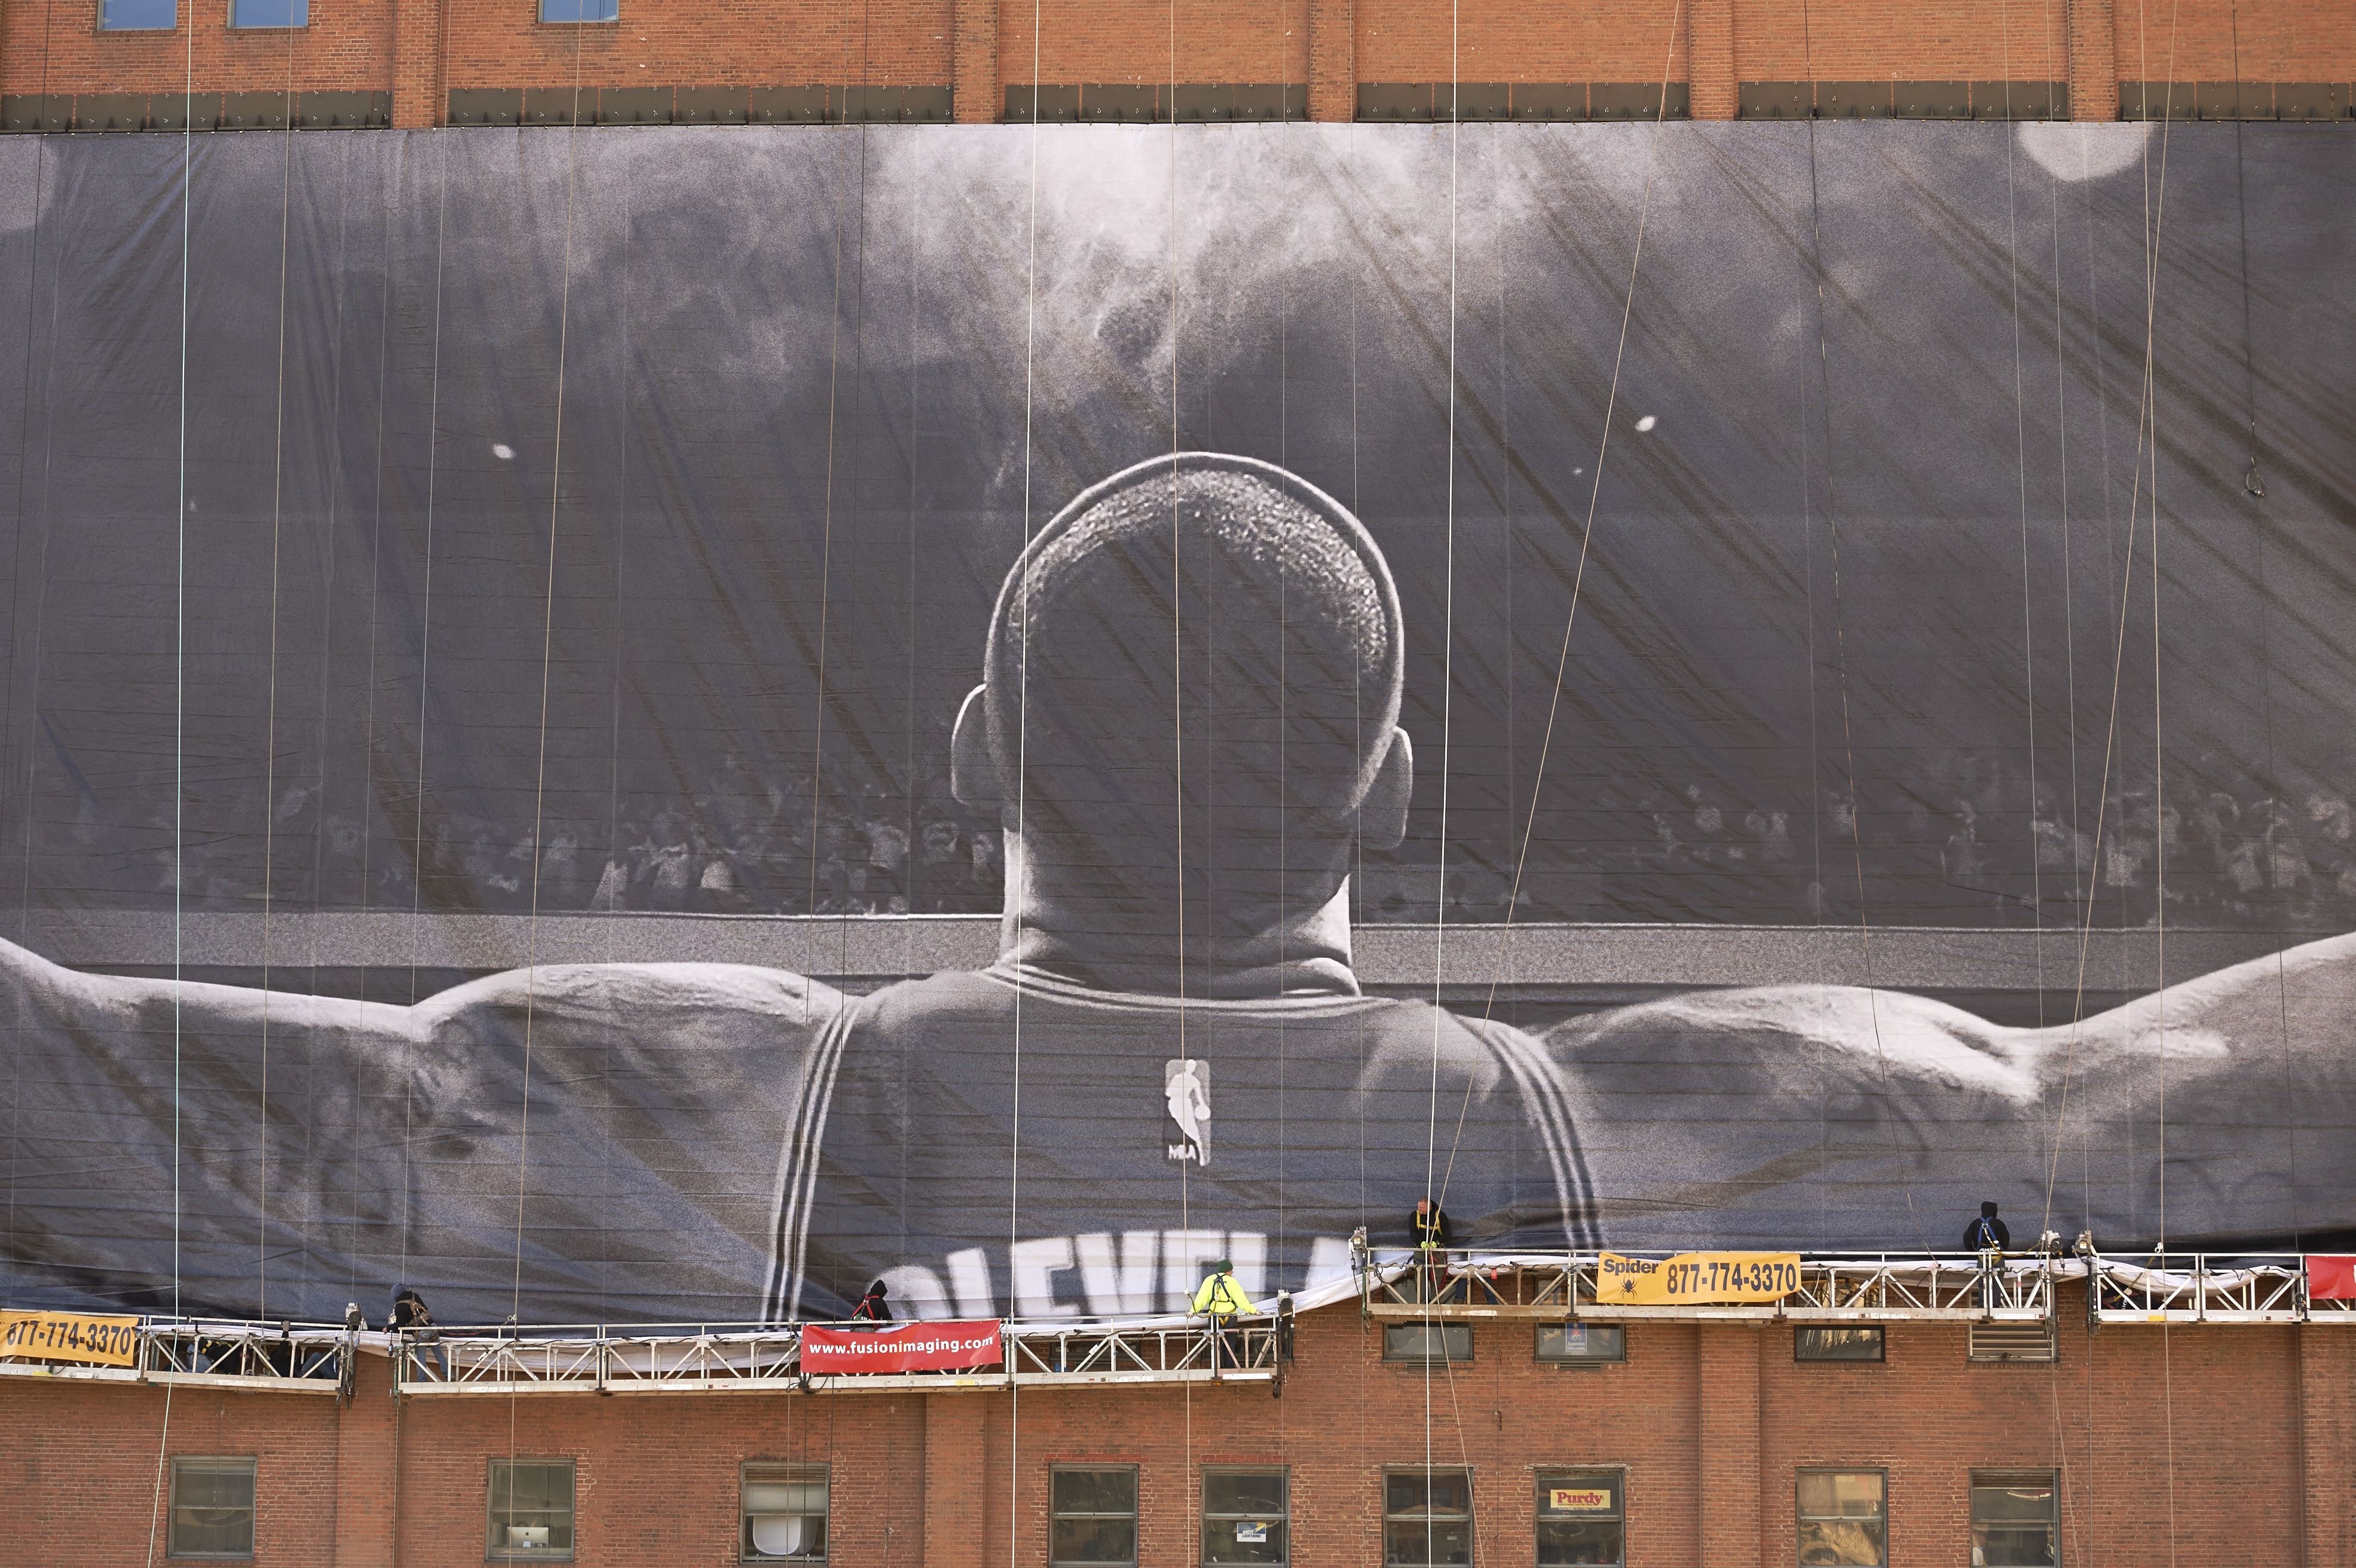 A giant banner of LeBron James is unfurled across a building. 